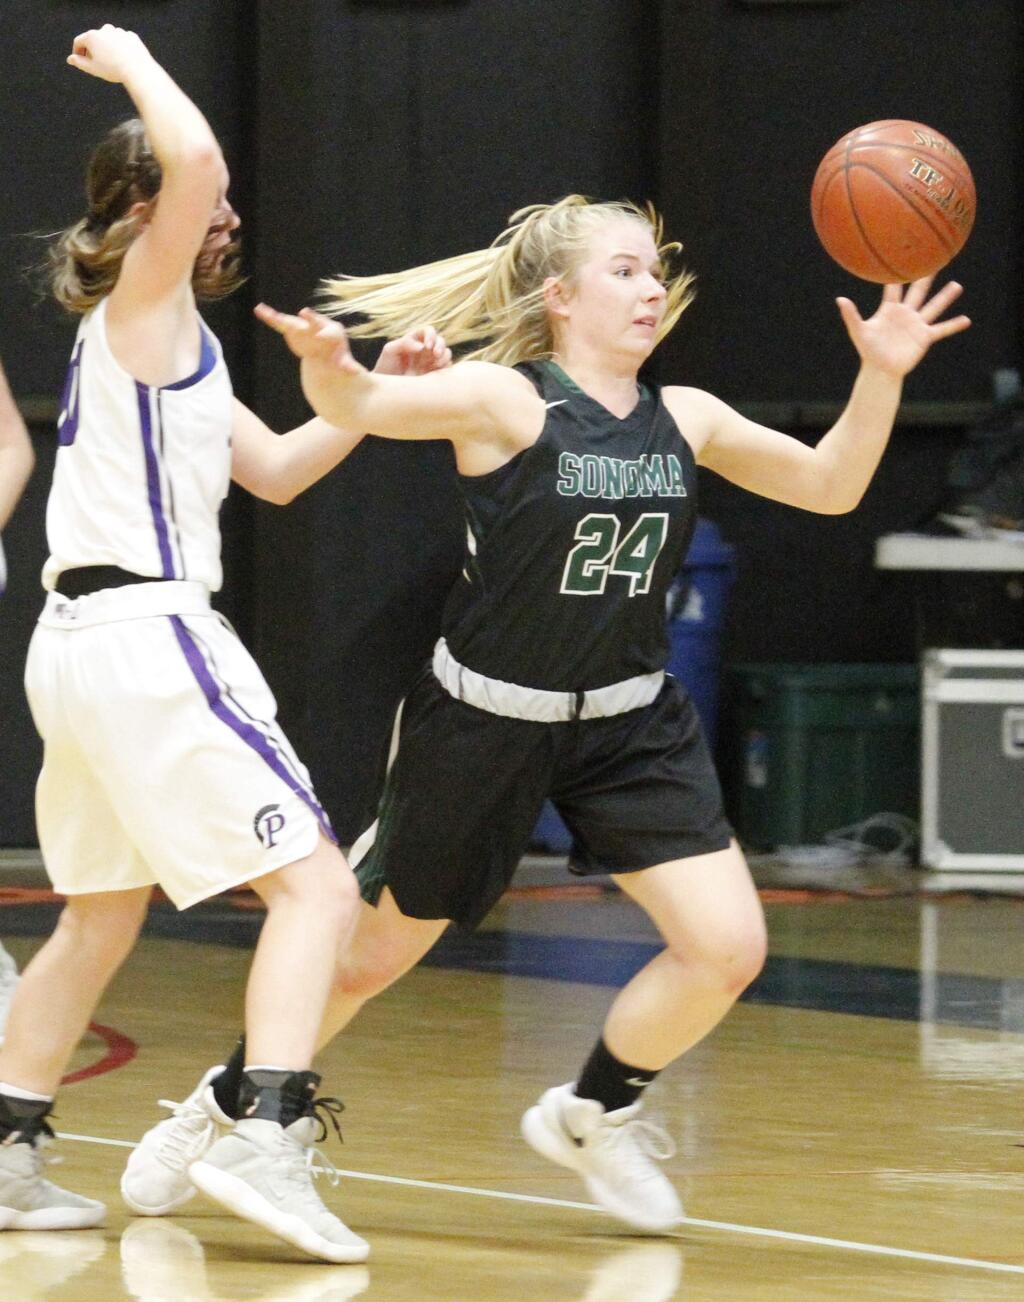 Bill Hoban/Index-TribuneSonoma's Alyssa Schimm tried to grab a loose ball during Friday night's Sonoma County League Championship game against Petaluma. Petaluma tied the game on a questionable foul call with 4.4 seconds, and went on to win in overtime.